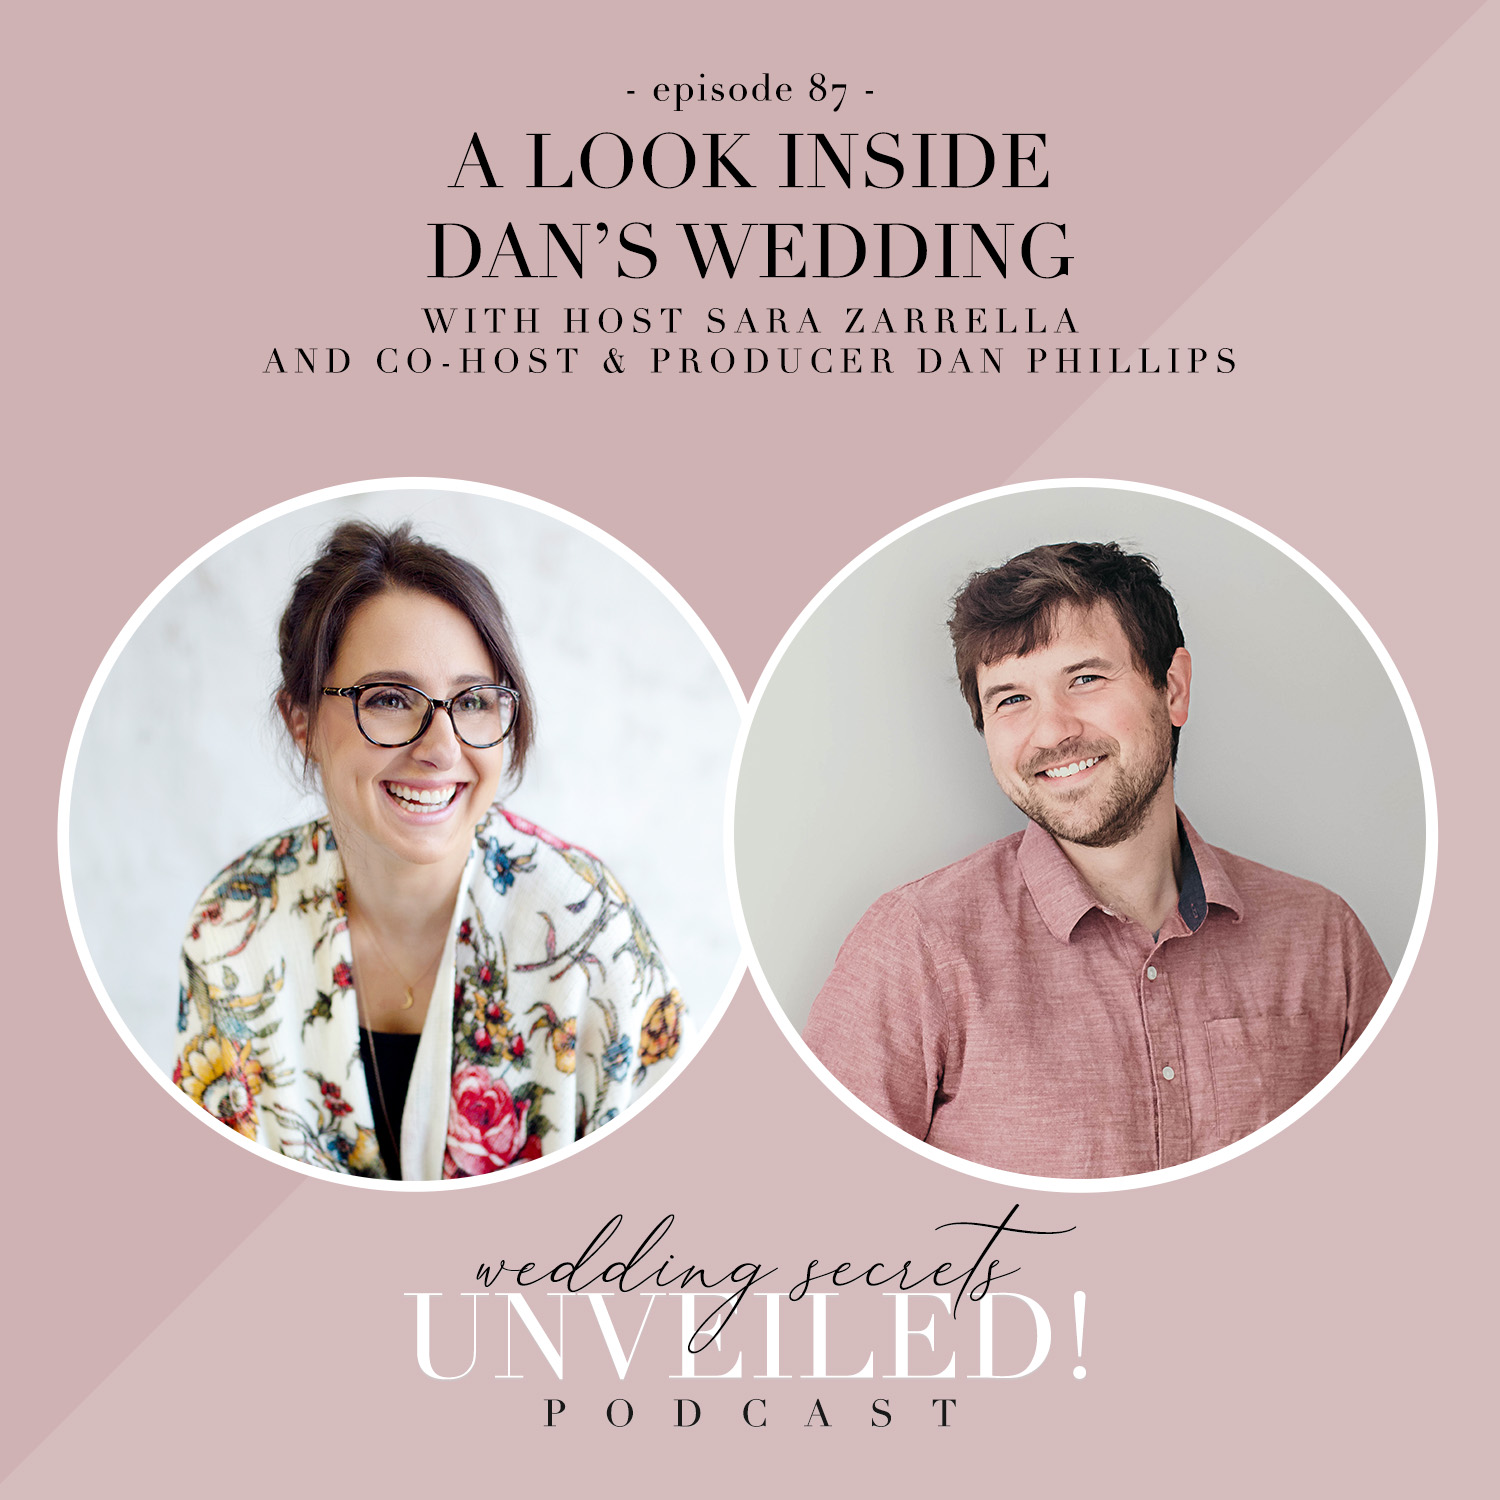 Co-host and producer Dan Phillips shares an inside look of his Greenwich RI wedding day on Wedding Secrets Unveiled! Podcast